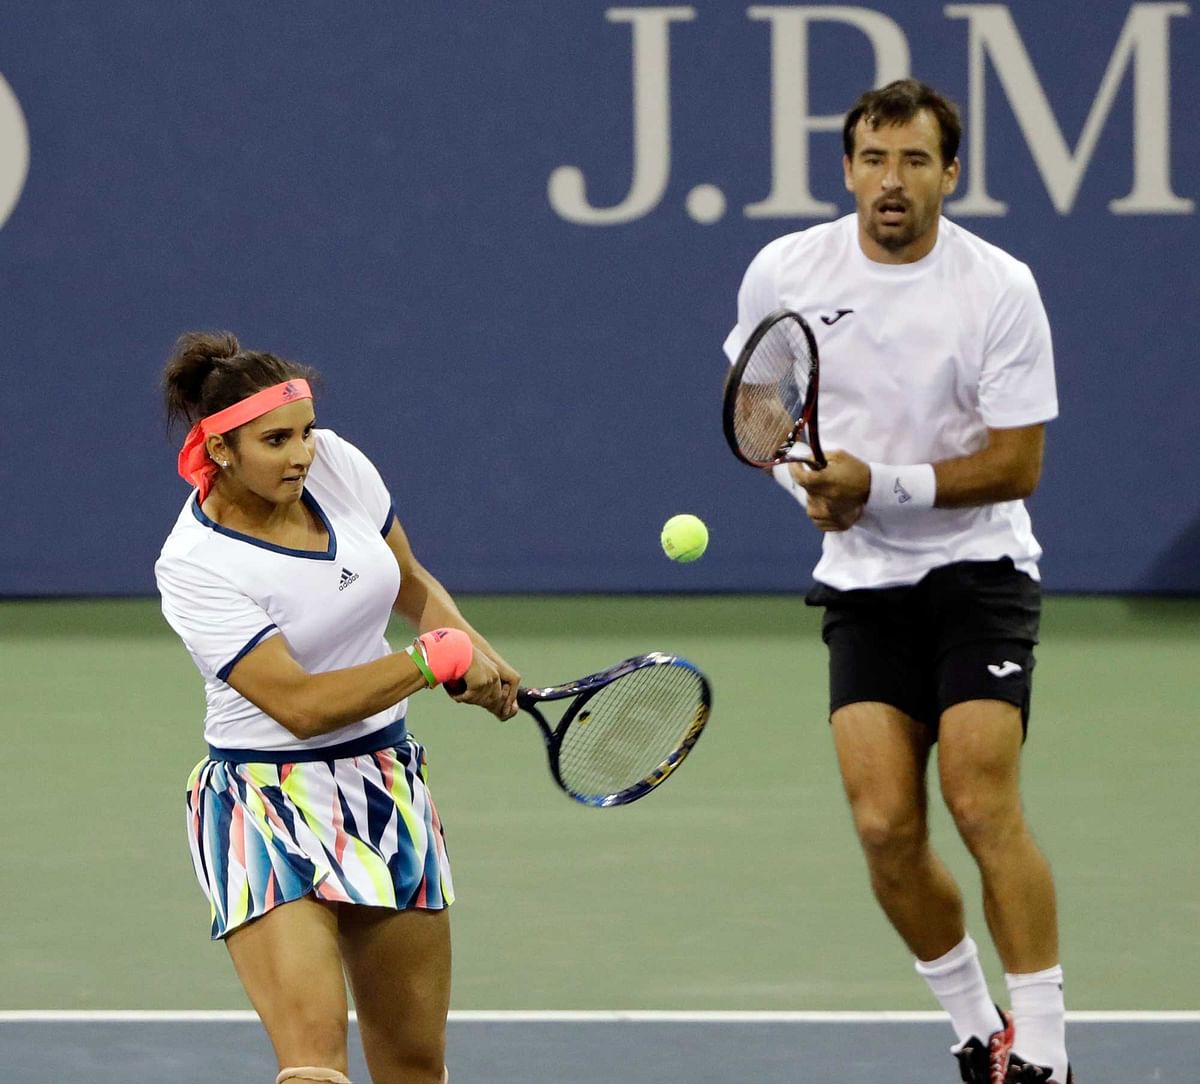 Sania Mirza and Ivan Dodig were the top seeds in the mixed doubles draw. 